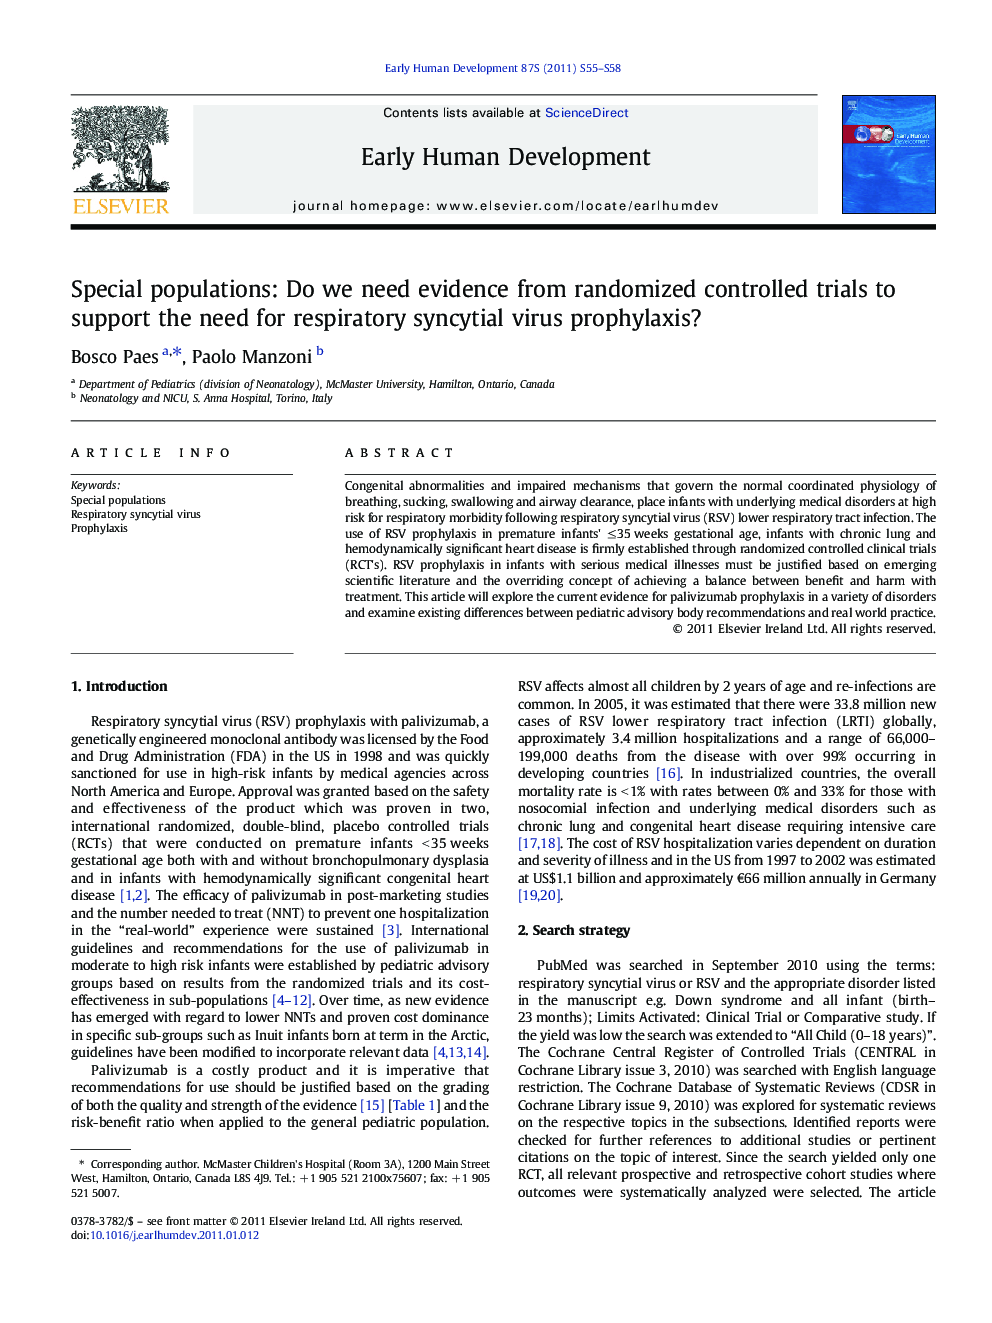 Special populations: Do we need evidence from randomized controlled trials to support the need for respiratory syncytial virus prophylaxis?